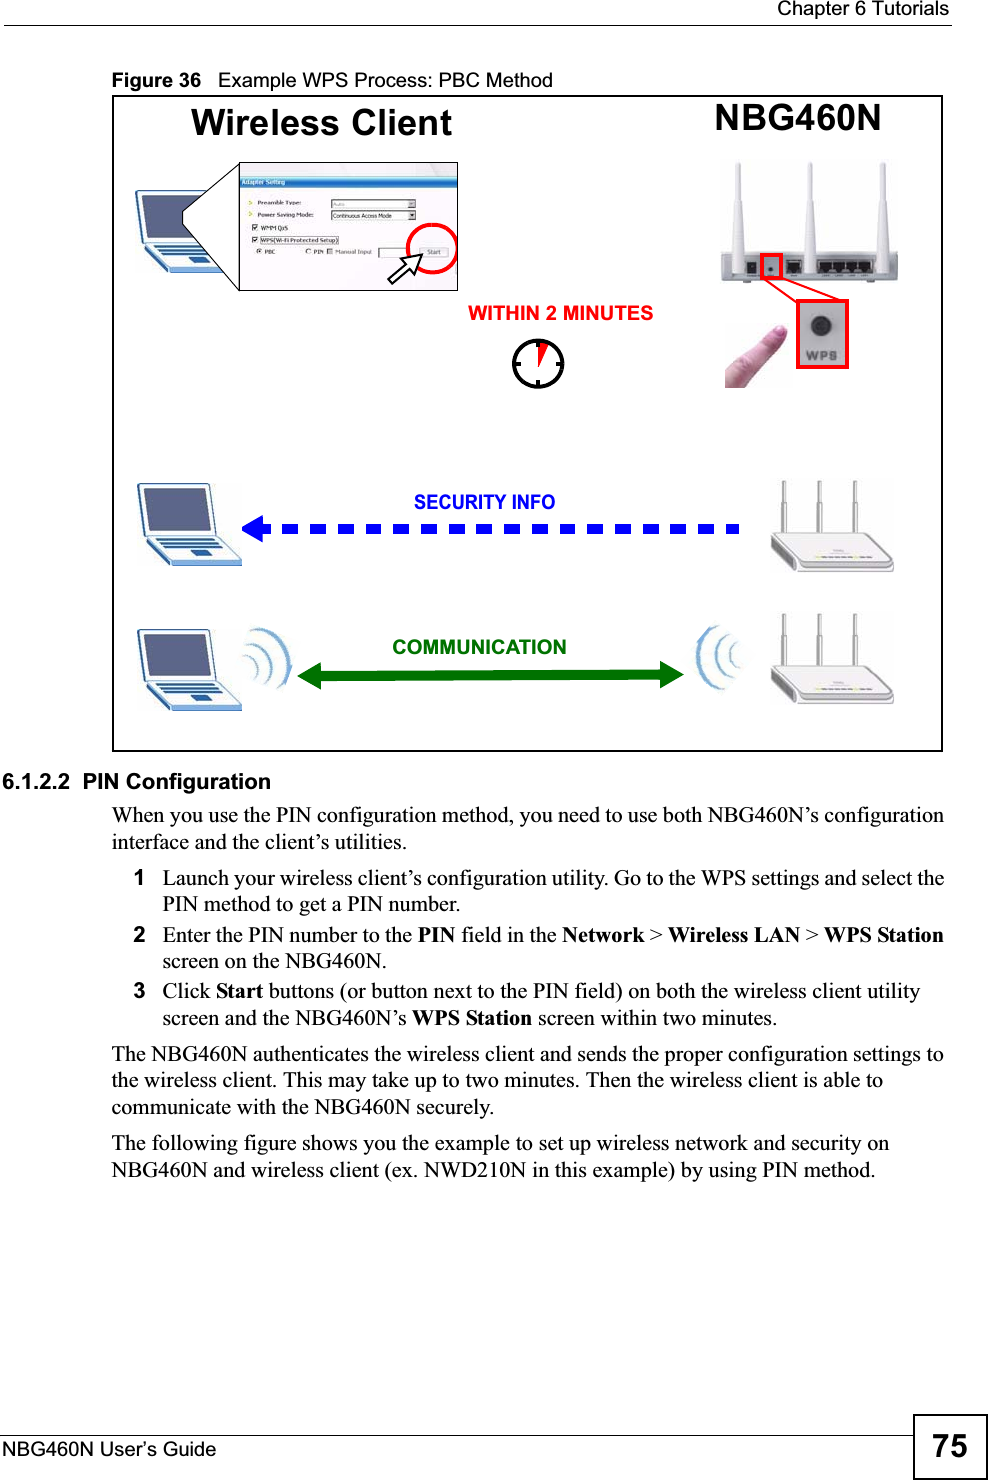  Chapter 6 TutorialsNBG460N User’s Guide 75Figure 36   Example WPS Process: PBC Method6.1.2.2  PIN ConfigurationWhen you use the PIN configuration method, you need to use both NBG460N’s configuration interface and the client’s utilities.1Launch your wireless client’s configuration utility. Go to the WPS settings and select the PIN method to get a PIN number.2Enter the PIN number to the PIN field in the Network &gt; Wireless LAN &gt;WPS Stationscreen on the NBG460N.3Click Start buttons (or button next to the PIN field) on both the wireless client utility screen and the NBG460N’s WPS Station screen within two minutes.The NBG460N authenticates the wireless client and sends the proper configuration settings to the wireless client. This may take up to two minutes. Then the wireless client is able to communicate with the NBG460N securely. The following figure shows you the example to set up wireless network and security on NBG460N and wireless client (ex. NWD210N in this example) by using PIN method. Wireless Client    NBG460NSECURITY INFOCOMMUNICATIONWITHIN 2 MINUTES